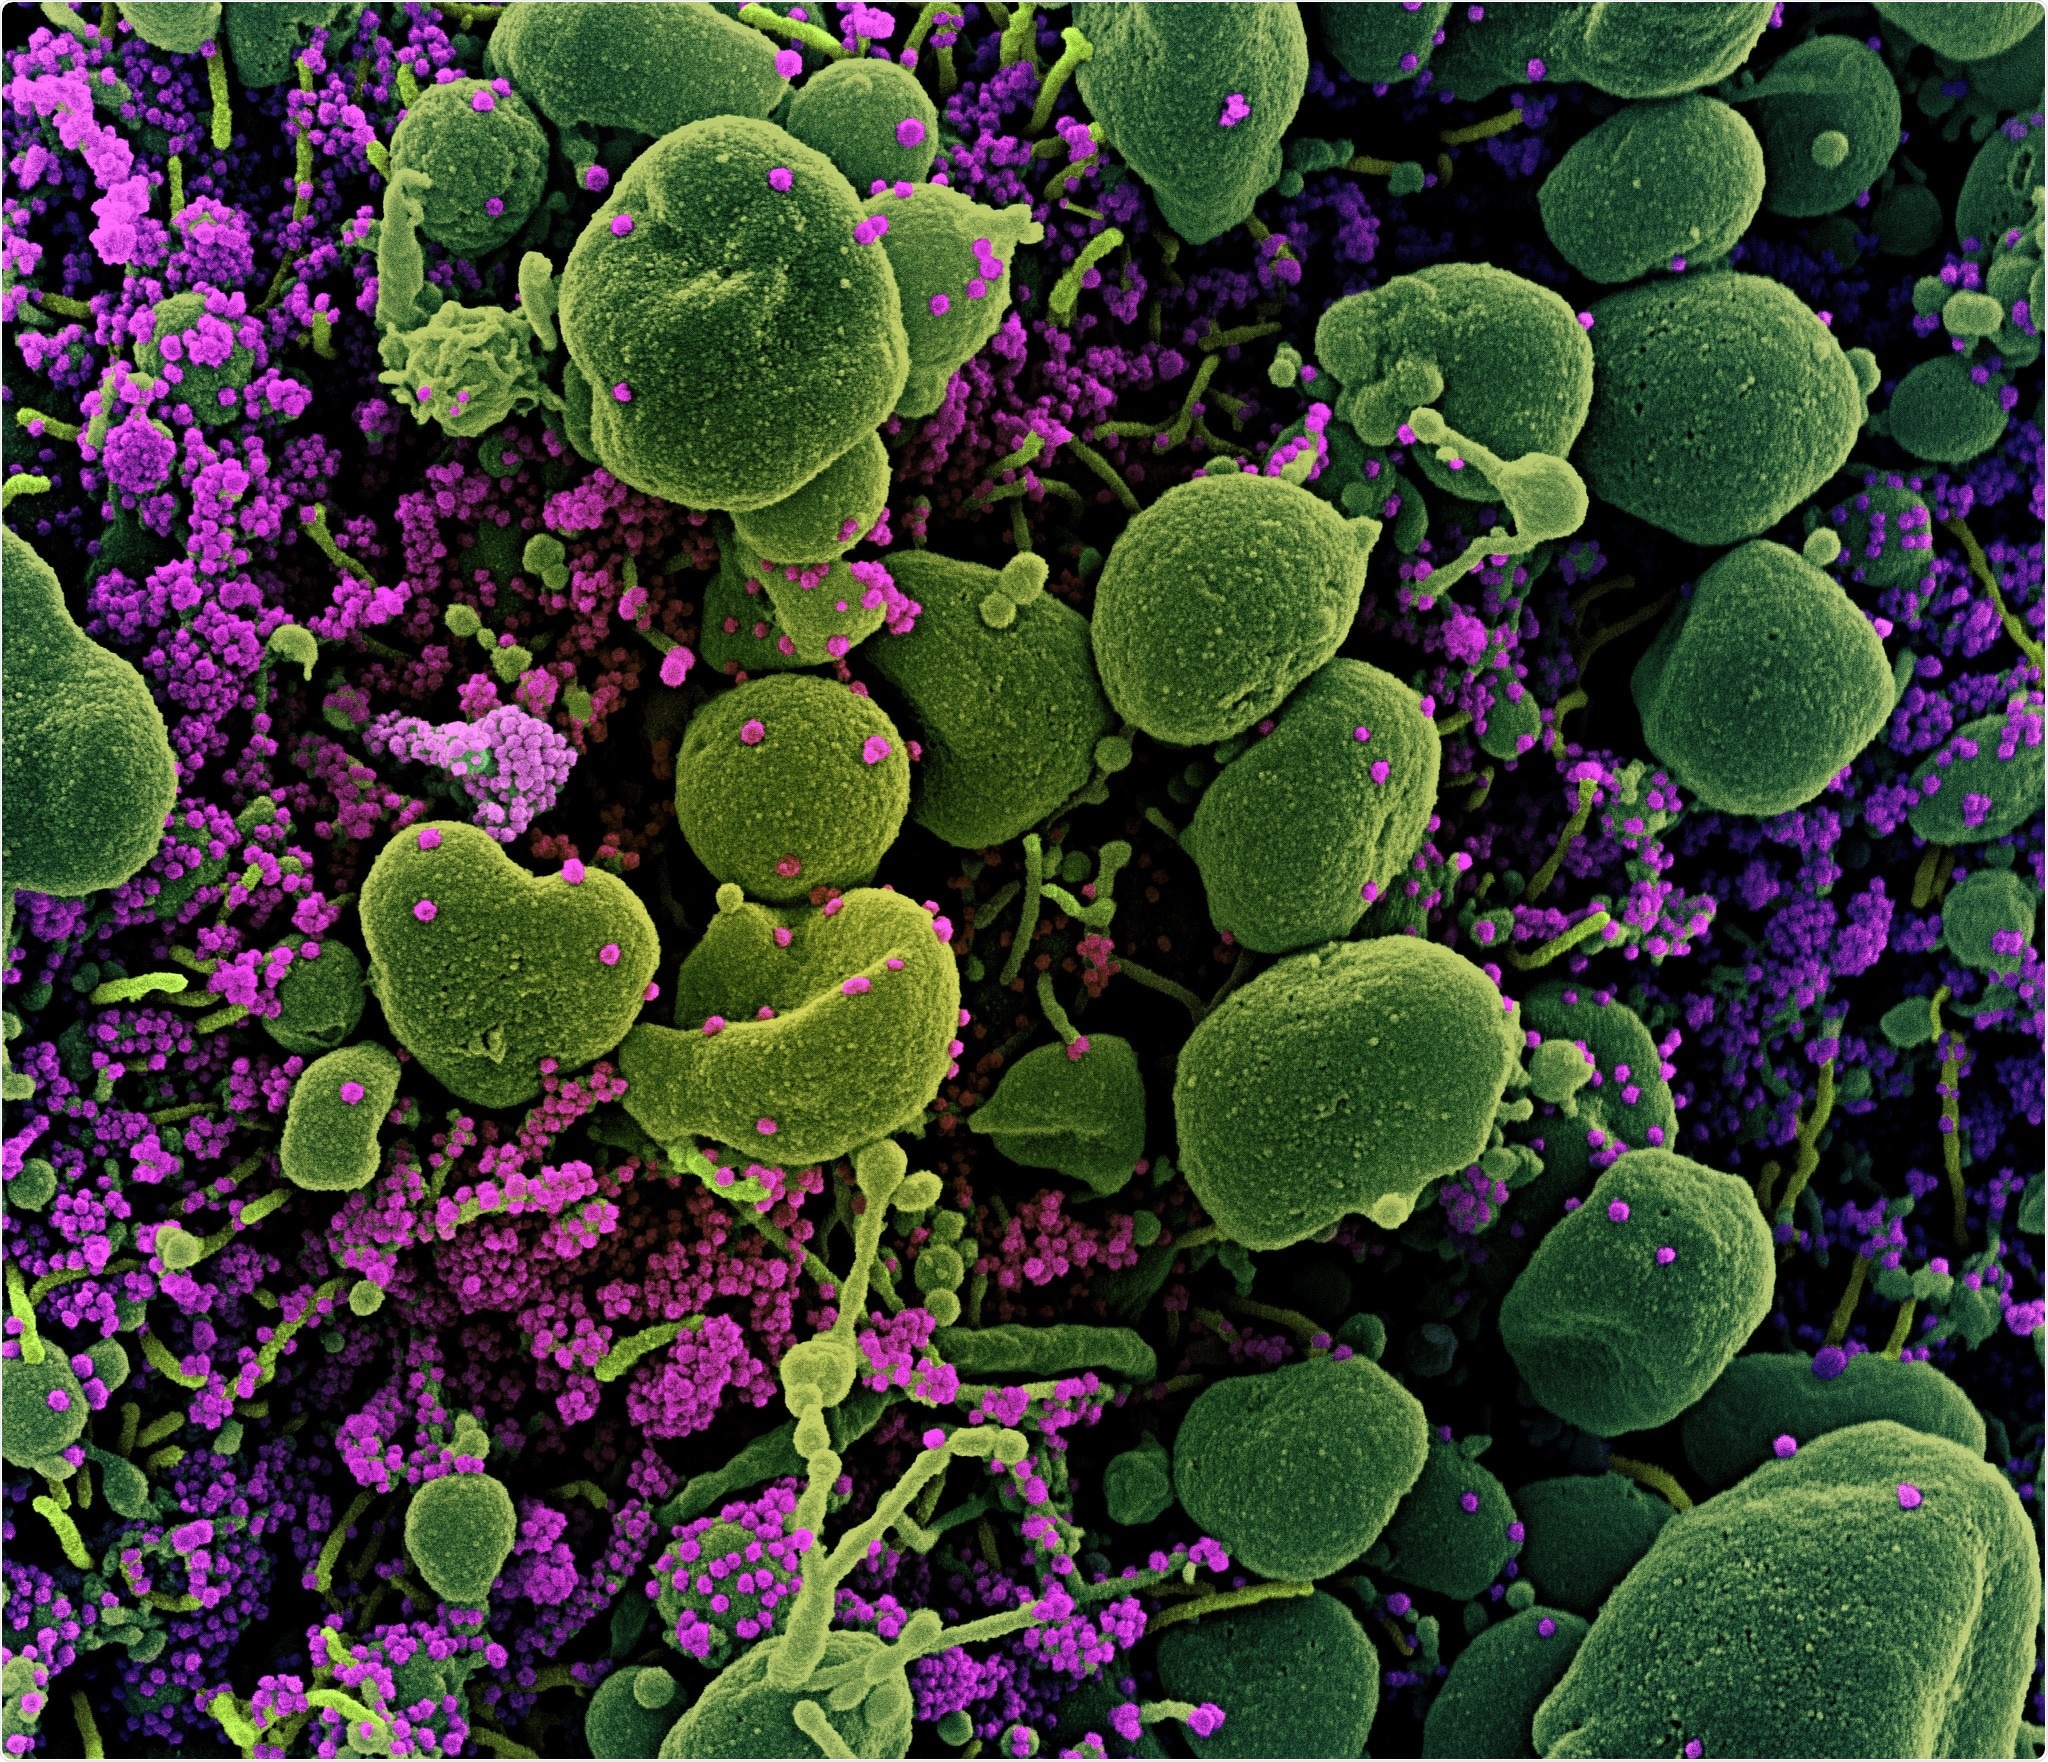 Colorized scanning electron micrograph of an apoptotic cell (green) heavily infected with SARS-CoV-2 virus particles (purple), isolated from a patient sample. Image captured at the NIAID Integrated Research Facility (IRF) in Fort Detrick, Maryland. Credit: NIAID